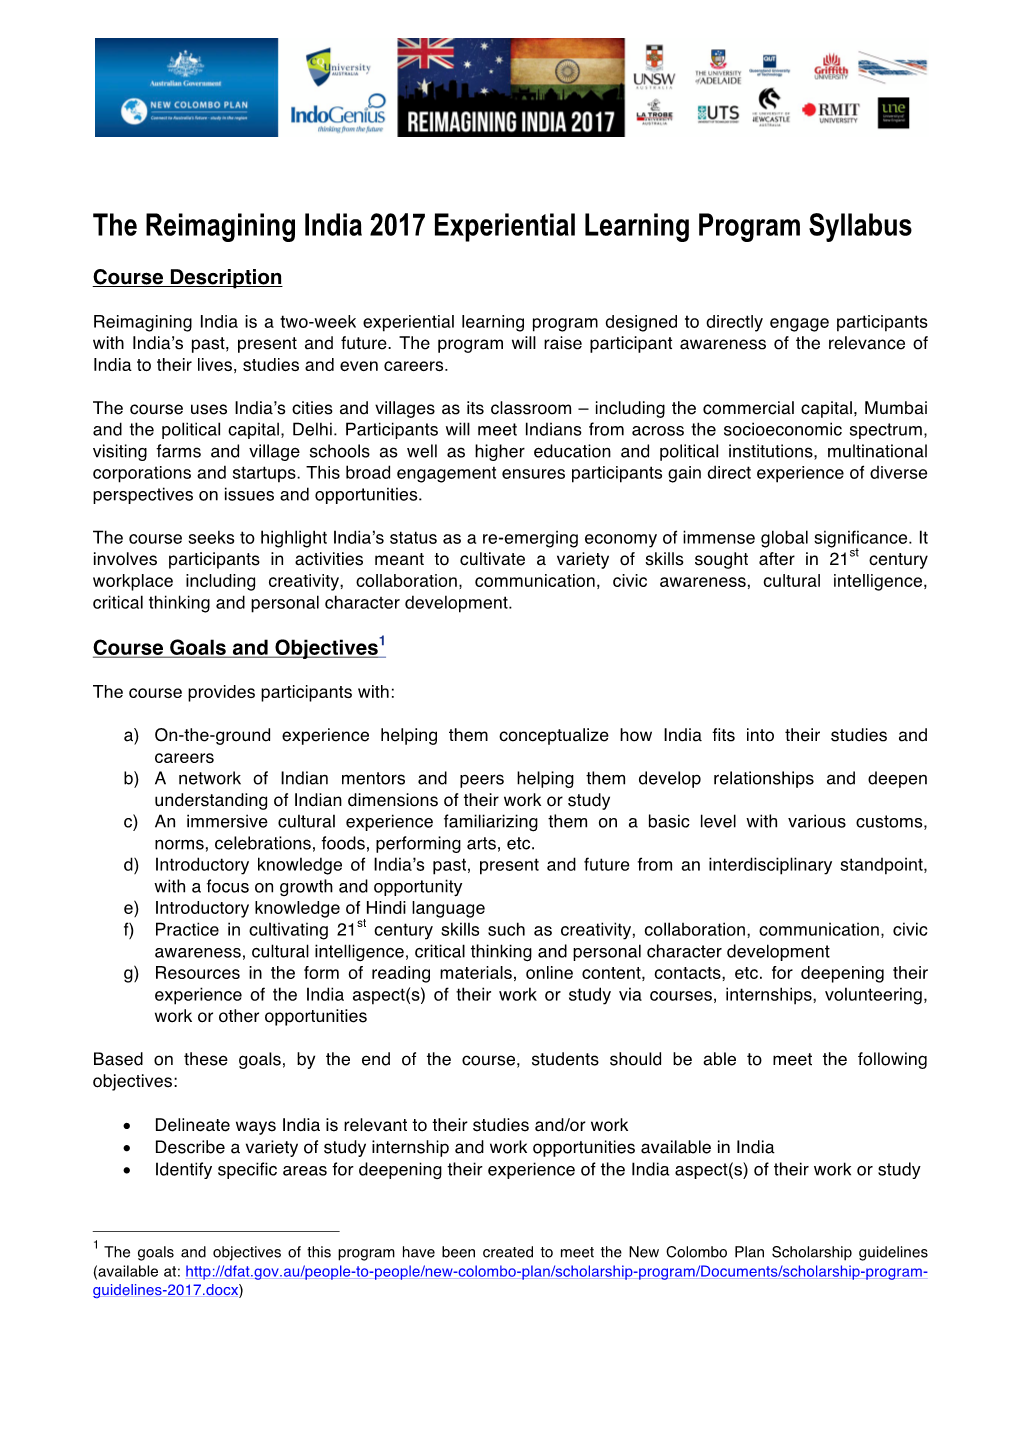 The Reimagining India 2017 Experiential Learning Program Syllabus